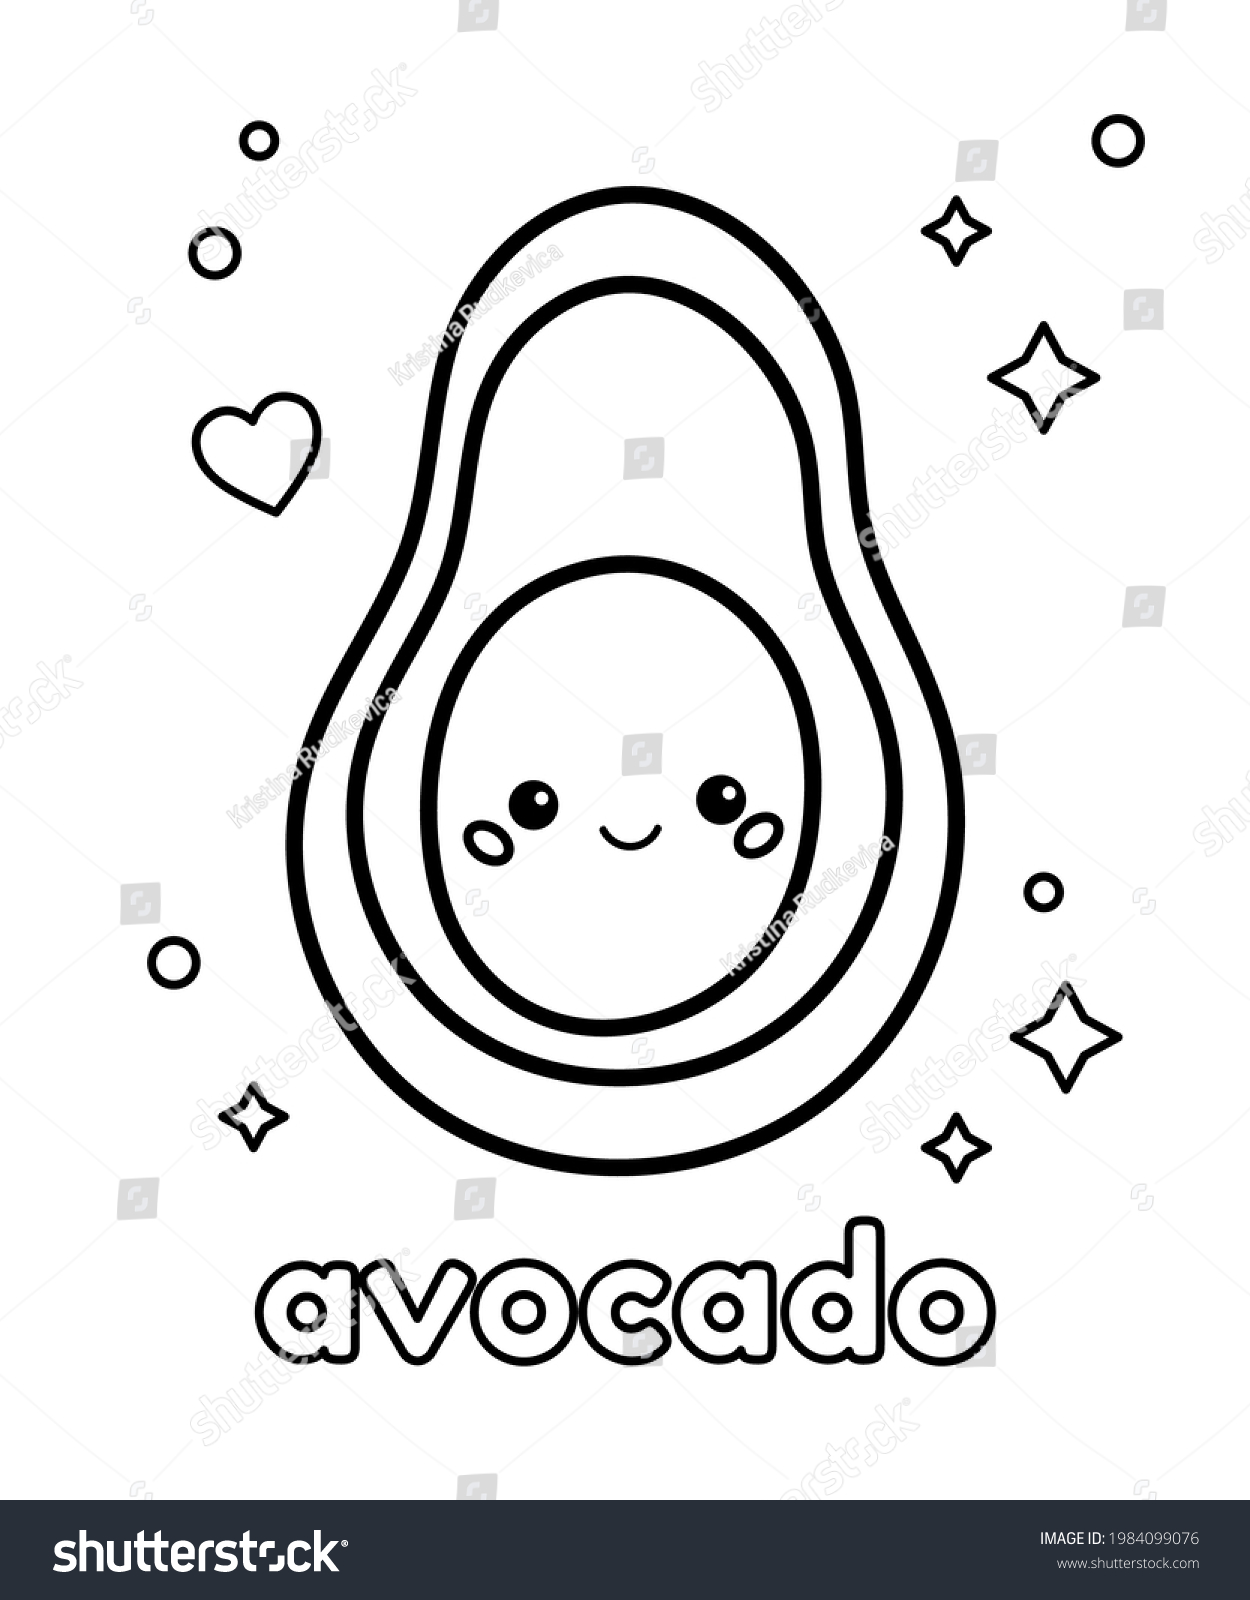 Coloring Page For Book With Cute Kawaii Avocado Royalty Free Stock